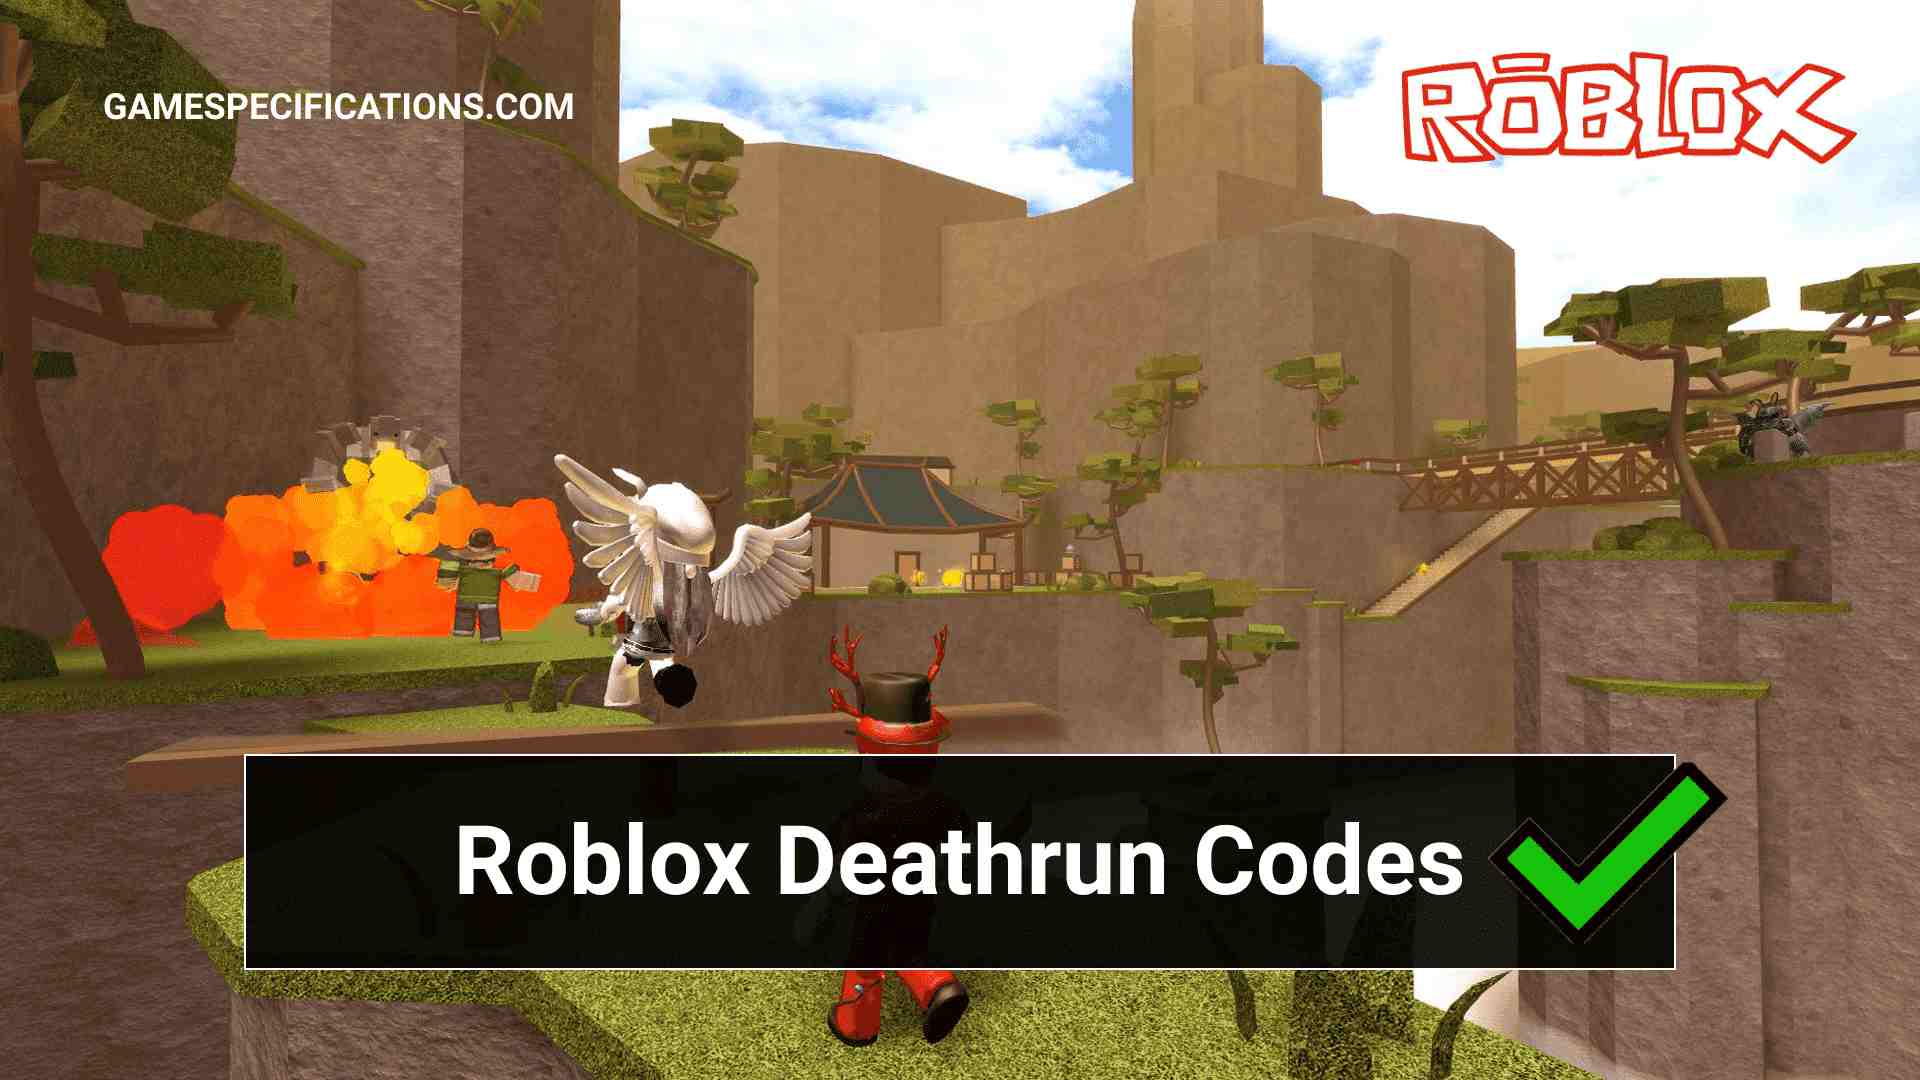 Roblox Deathrun Codes July 2021 Game Specifications - new code in deathrun roblox